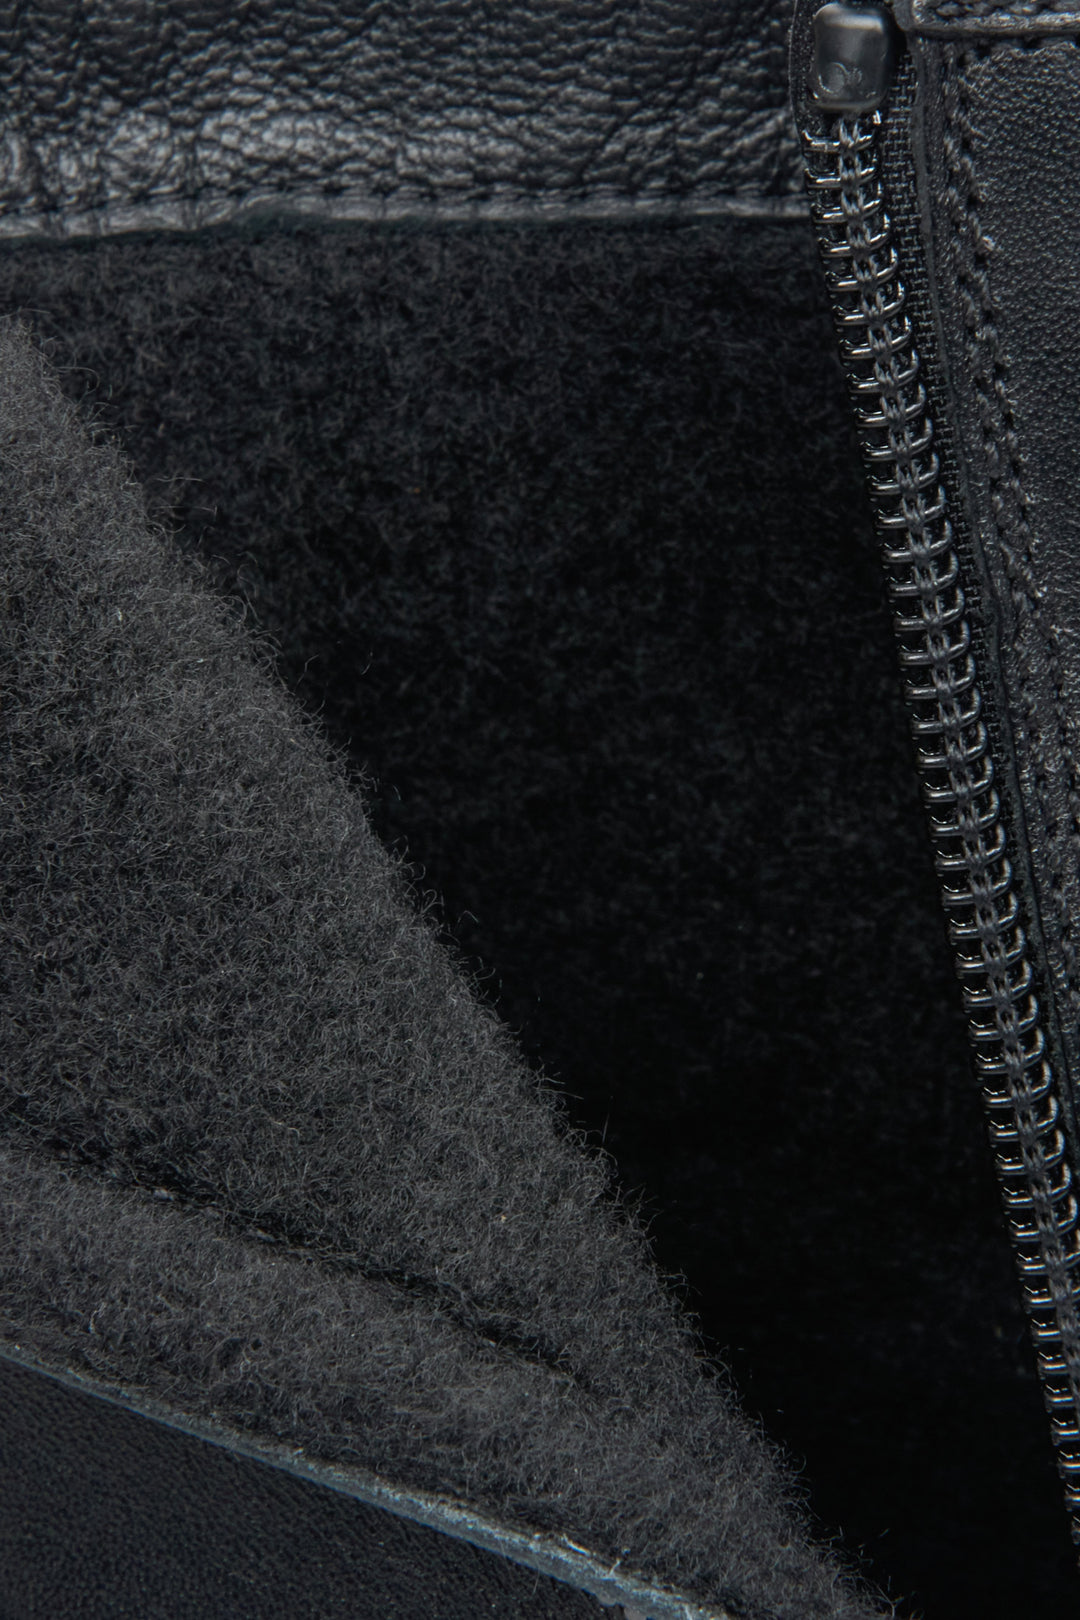 Men's black Estro autumn ankle boots - close-up on the interior of the shoe.